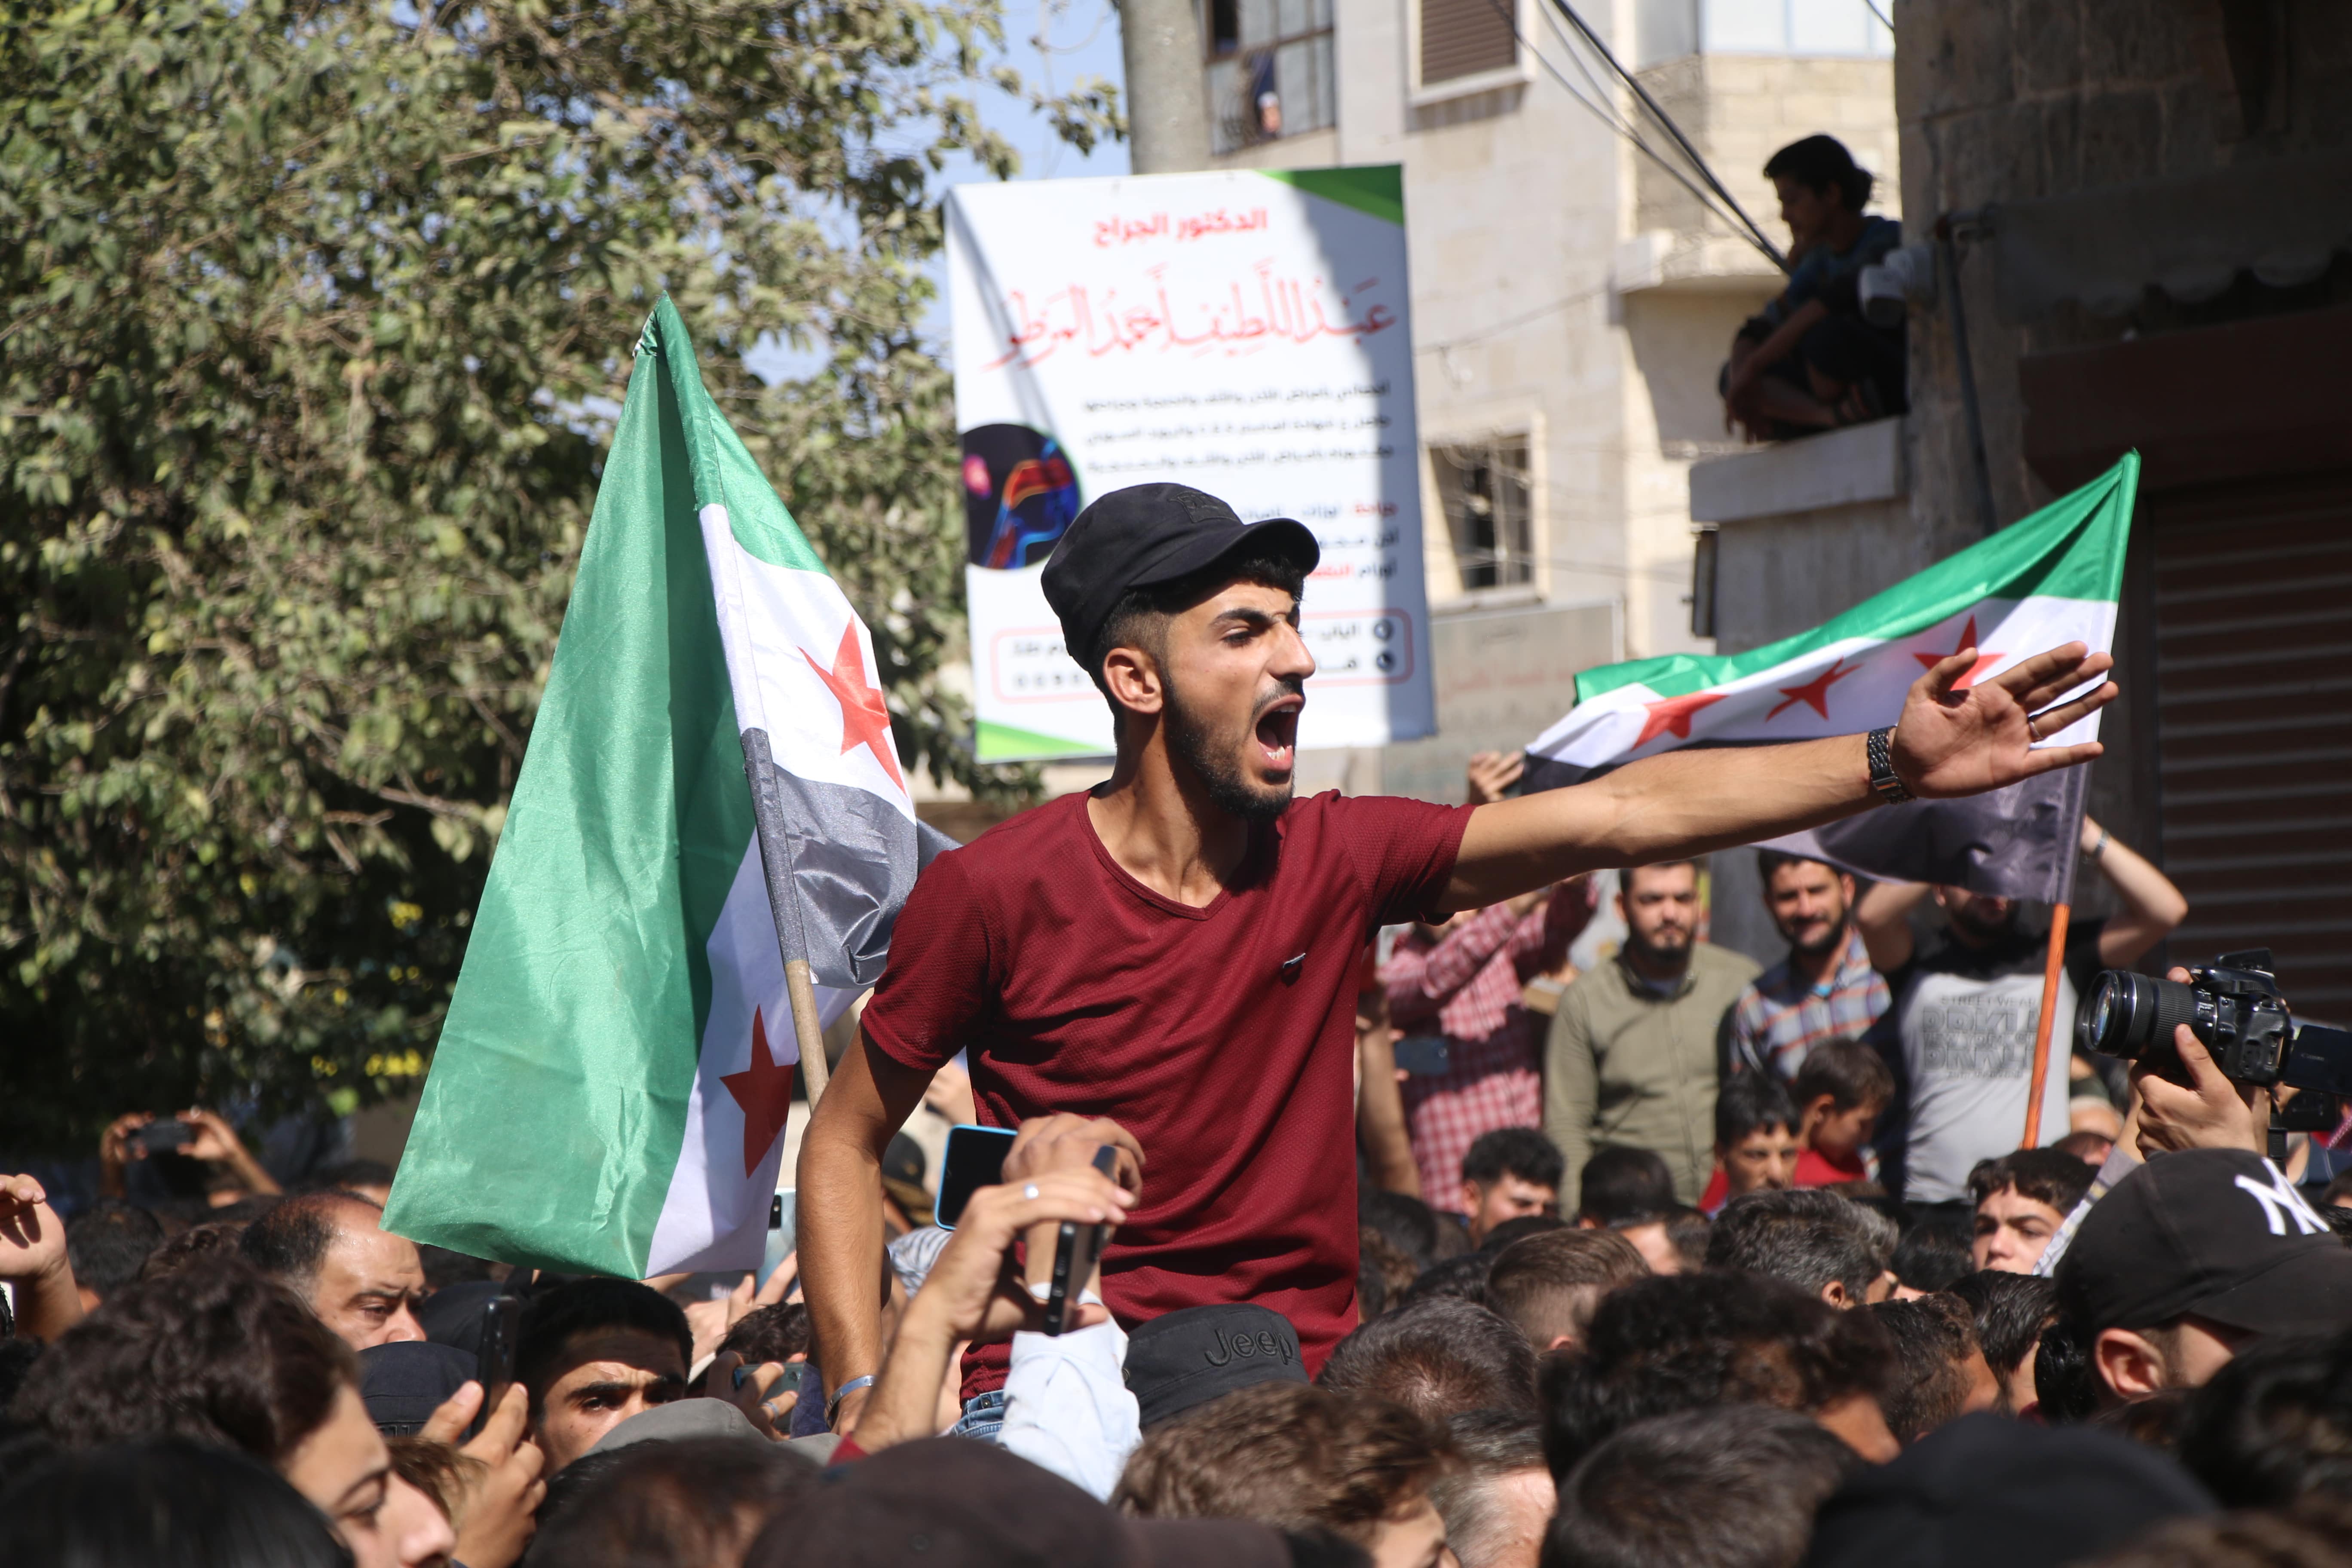 Hundreds join funeral of activist Muhammad Abdul Latif, known as Abo Ghanoum who was killed by unknown assailants in Syria's al-Bab city on 7 October 2022 (MEE/Walid al-Idlibi)